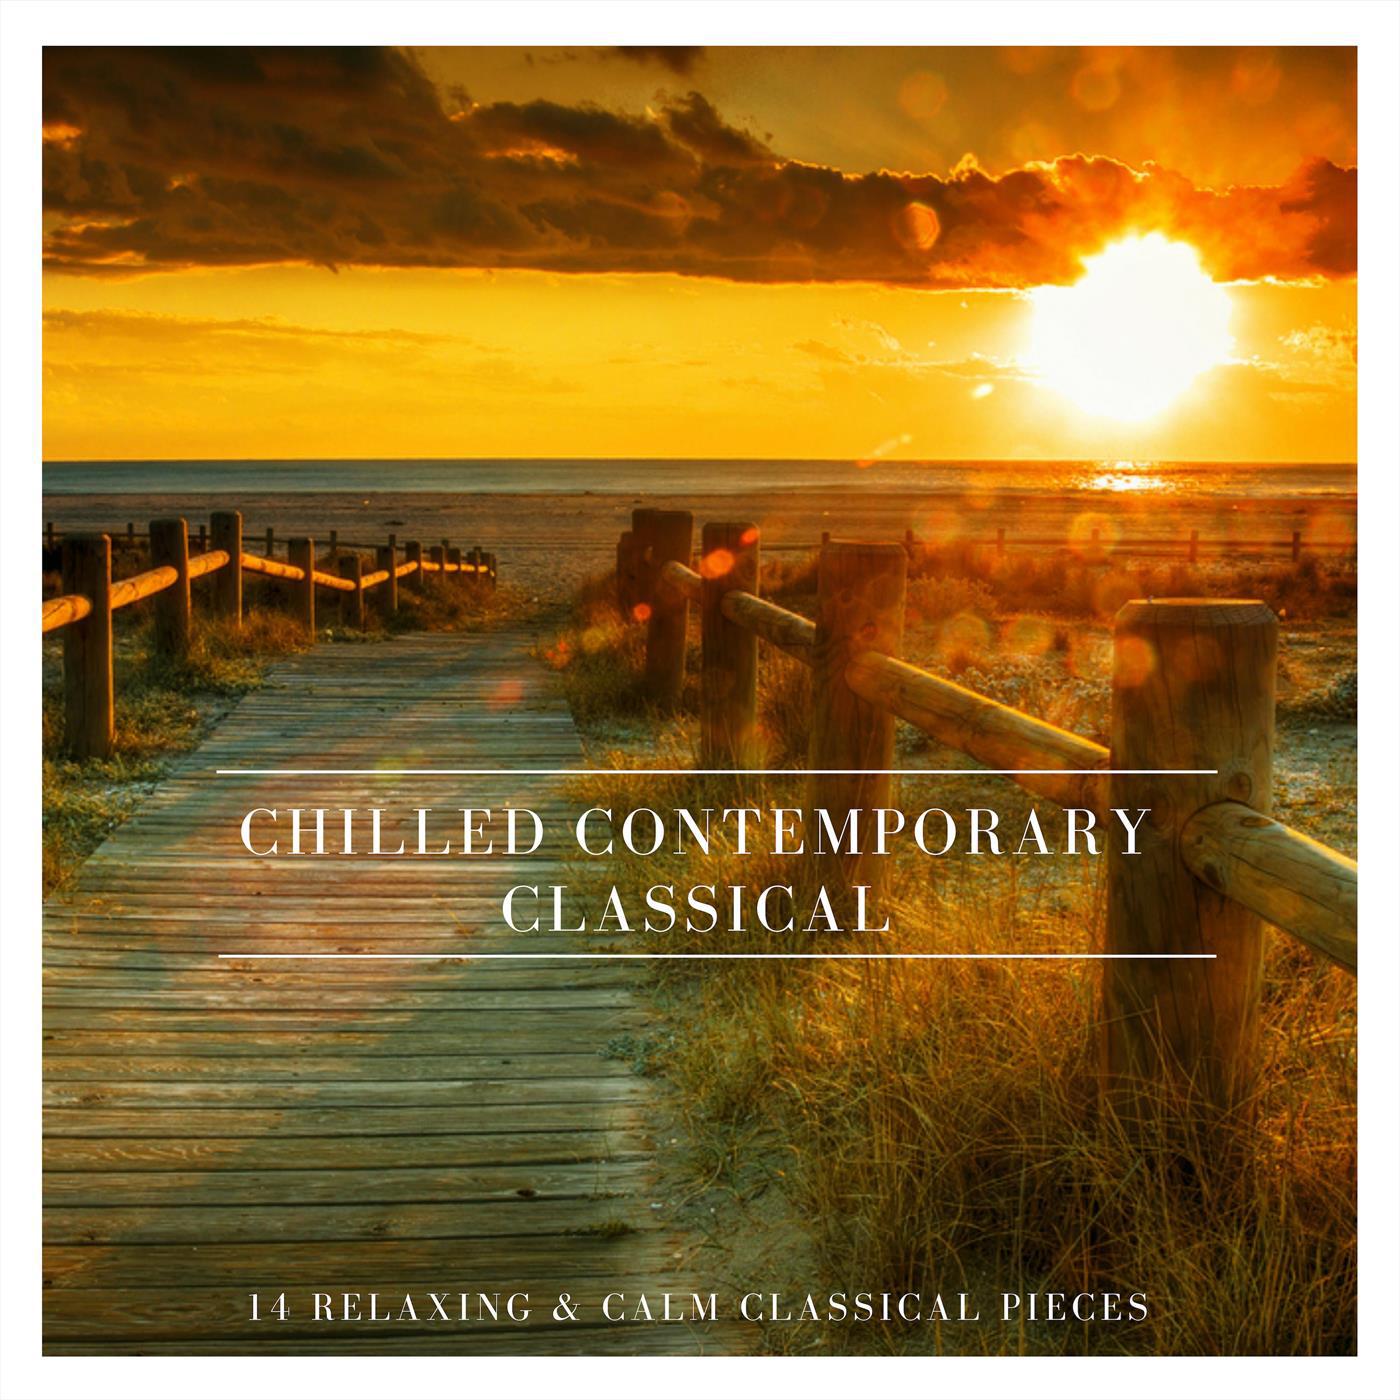 Chilled Contemporary Classical: 14 Relaxing and Calm Classical Pieces